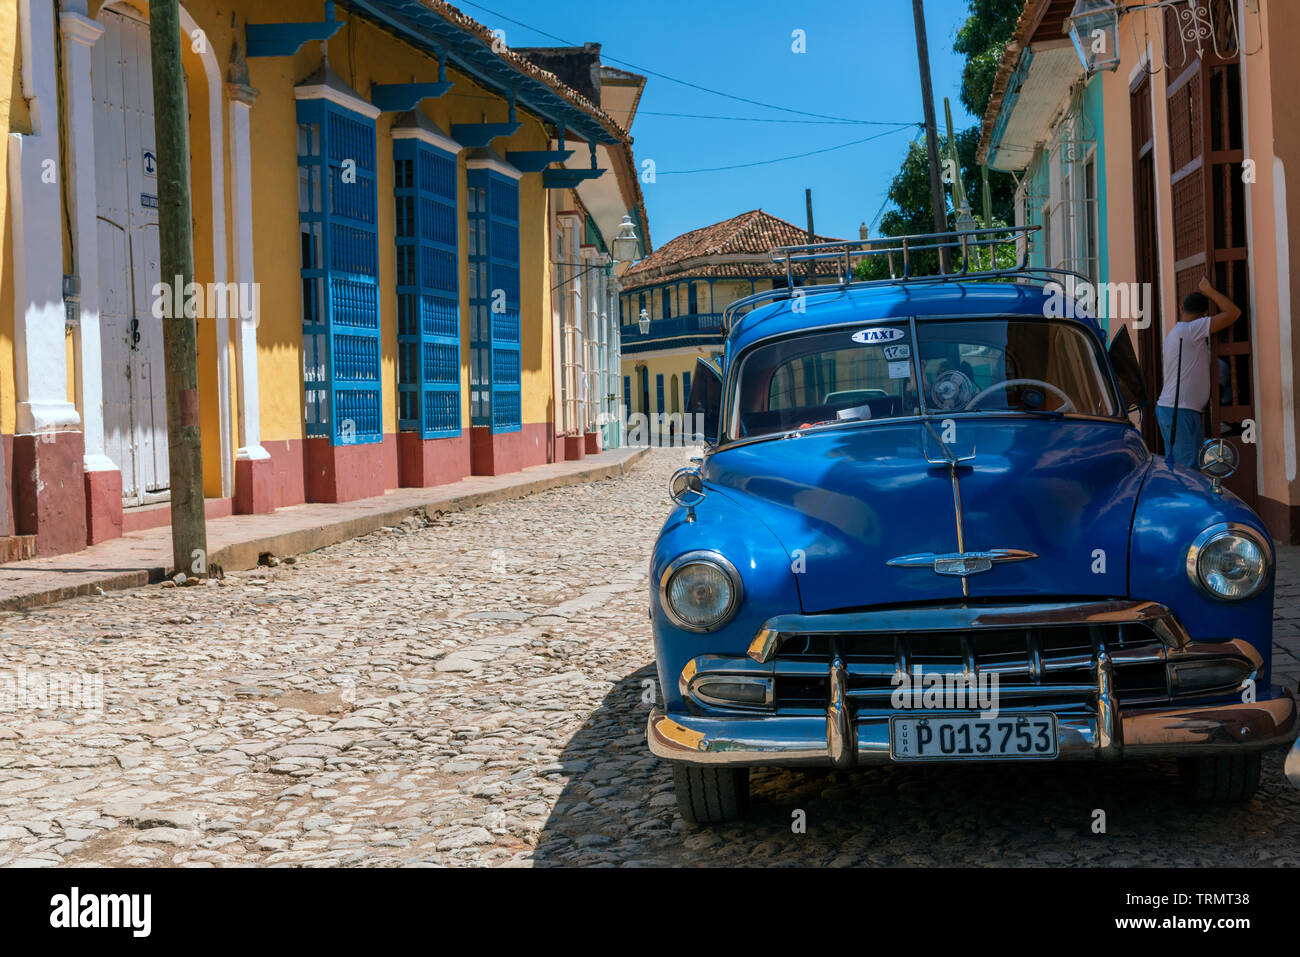 Classic American blue taxi parked on a picturesque  cobblestone street in the old colonial town of Trinidad, Sancti Spiritus, Cuba, Caribbean Stock Photo